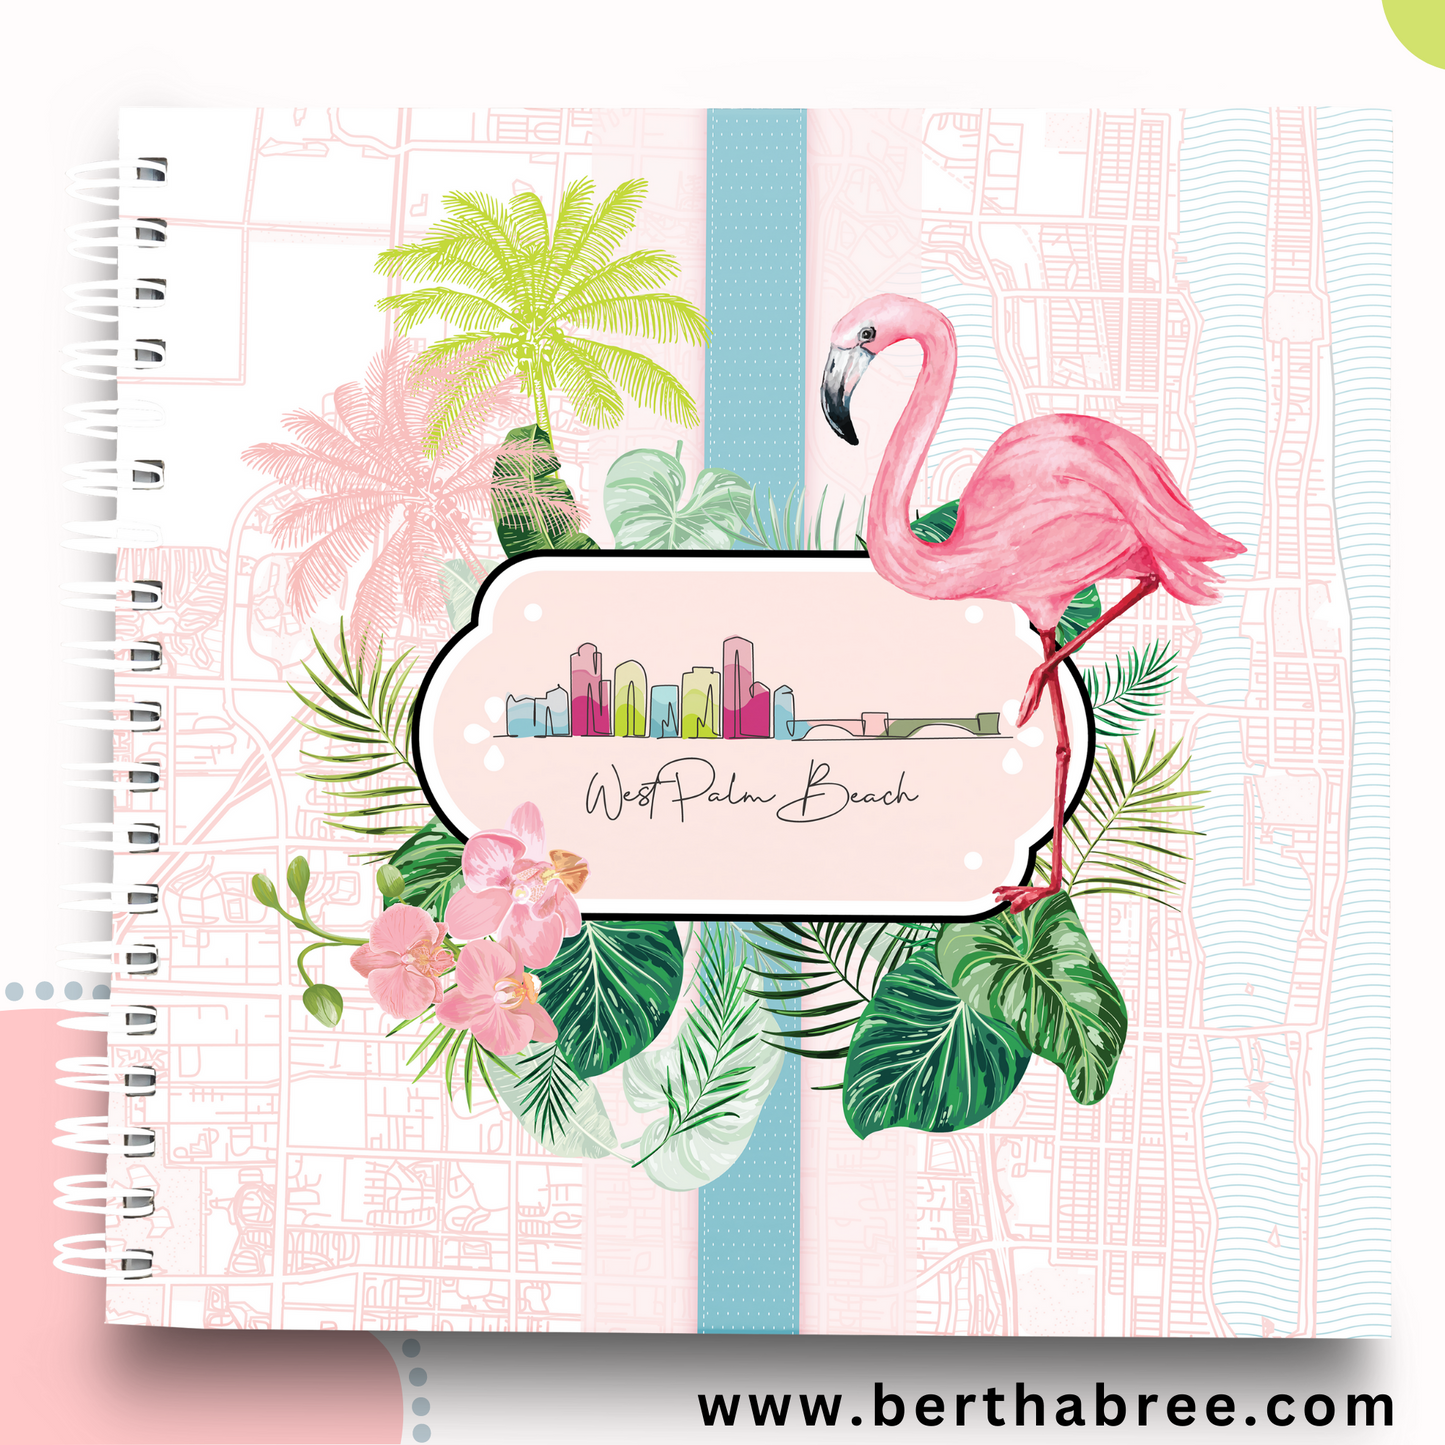 Planner me to - Printable Planner, Journal & Notepad Cove